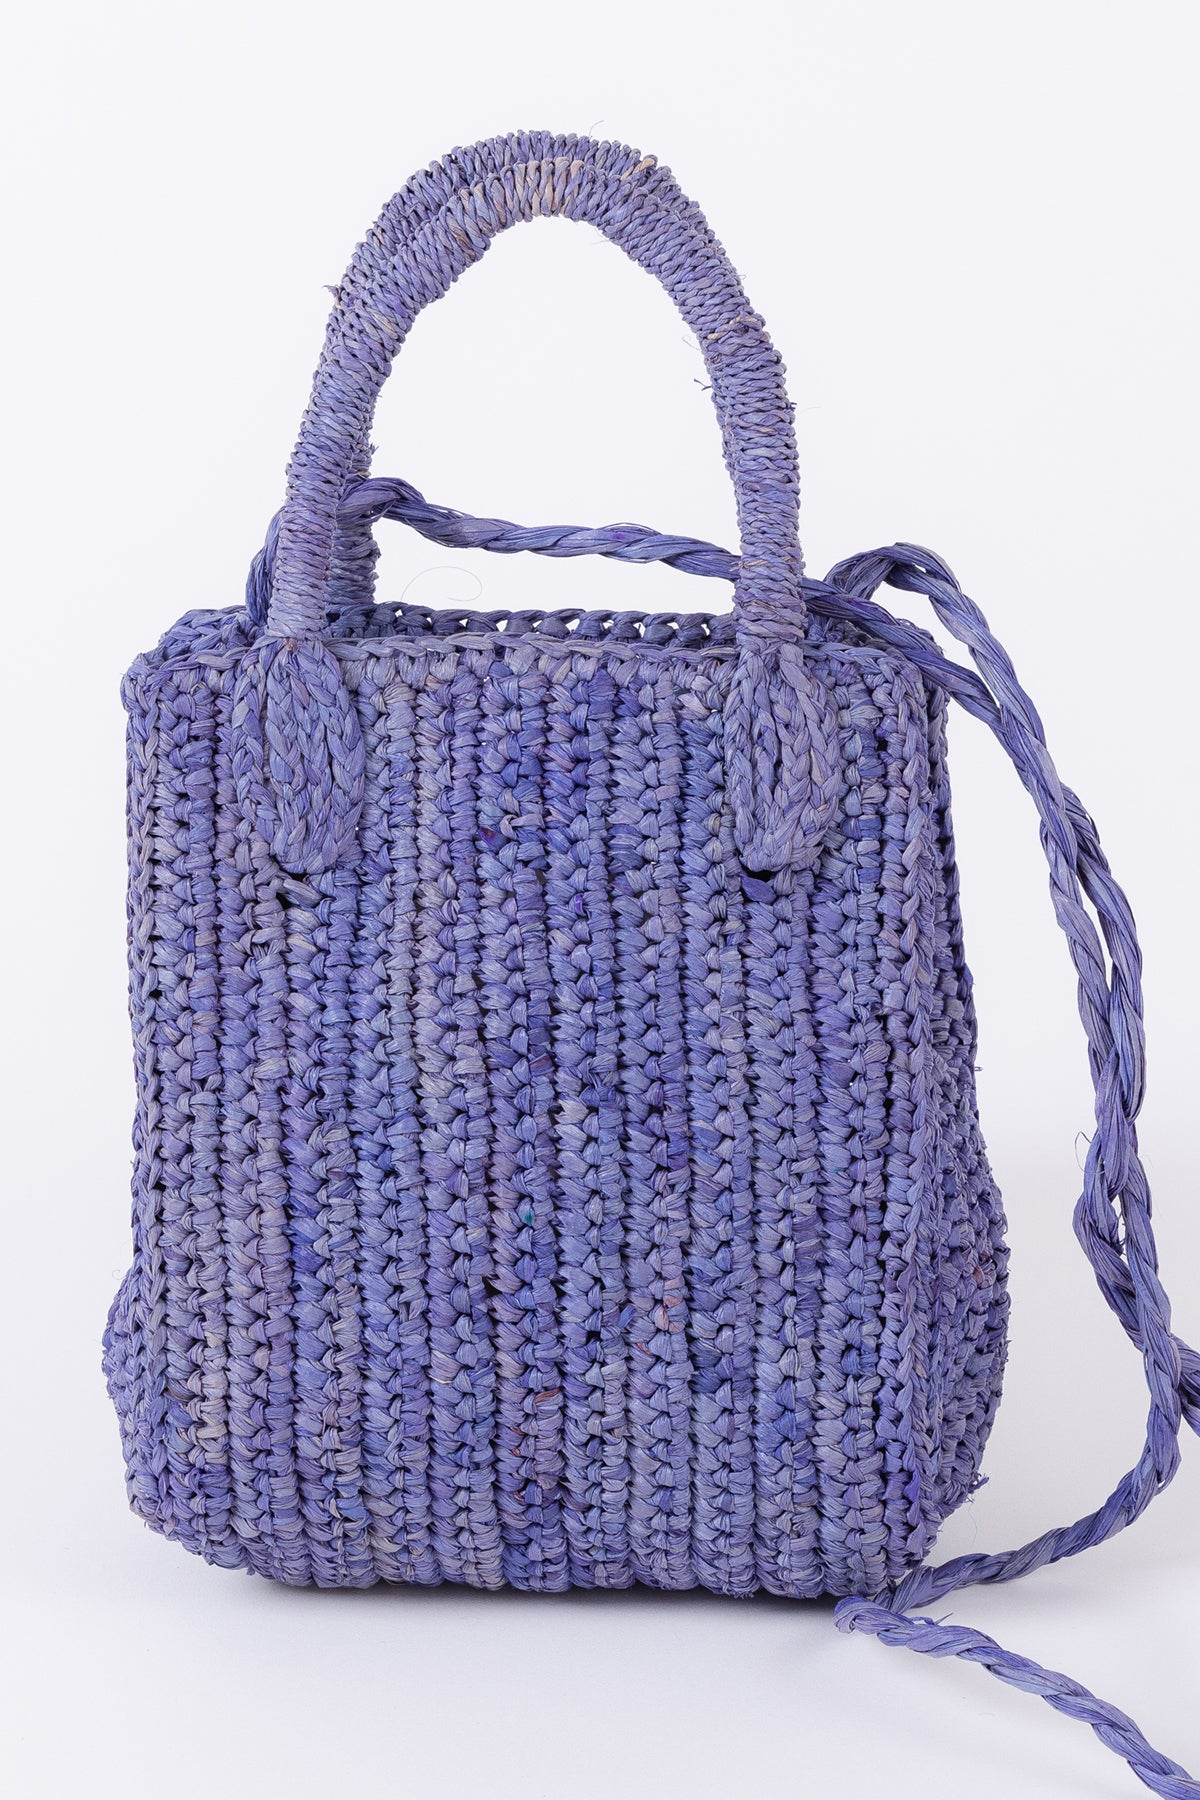 Woven lilac MIMI RAFFIA CROSSBODY tote bag by Velvet by Graham & Spencer against a white background.-26051037397185